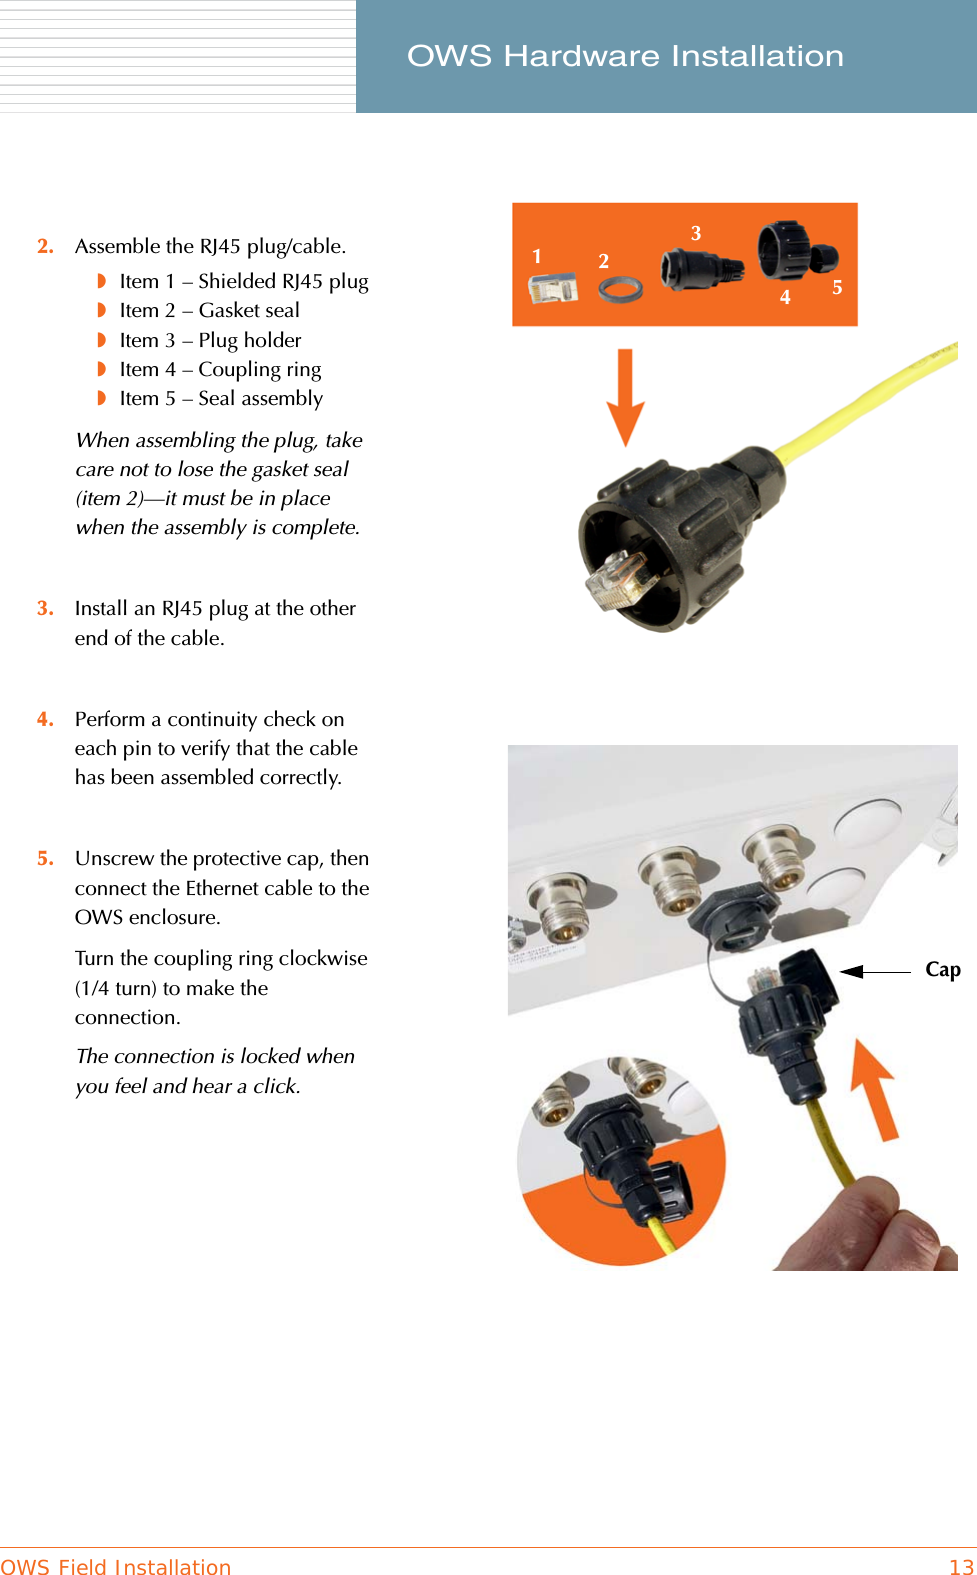 OWS Field Installation 13     OWS Hardware Installation2. Assemble the RJ45 plug/cable.◗Item 1 – Shielded RJ45 plug◗Item 2 – Gasket seal◗Item 3 – Plug holder◗Item 4 – Coupling ring◗Item 5 – Seal assemblyWhen assembling the plug, take care not to lose the gasket seal (item 2)—it must be in place when the assembly is complete.3. Install an RJ45 plug at the other end of the cable.4. Perform a continuity check on each pin to verify that the cable has been assembled correctly.5. Unscrew the protective cap, then connect the Ethernet cable to the OWS enclosure.Turn the coupling ring clockwise (1/4 turn) to make the connection.The connection is locked when you feel and hear a click.12345Cap